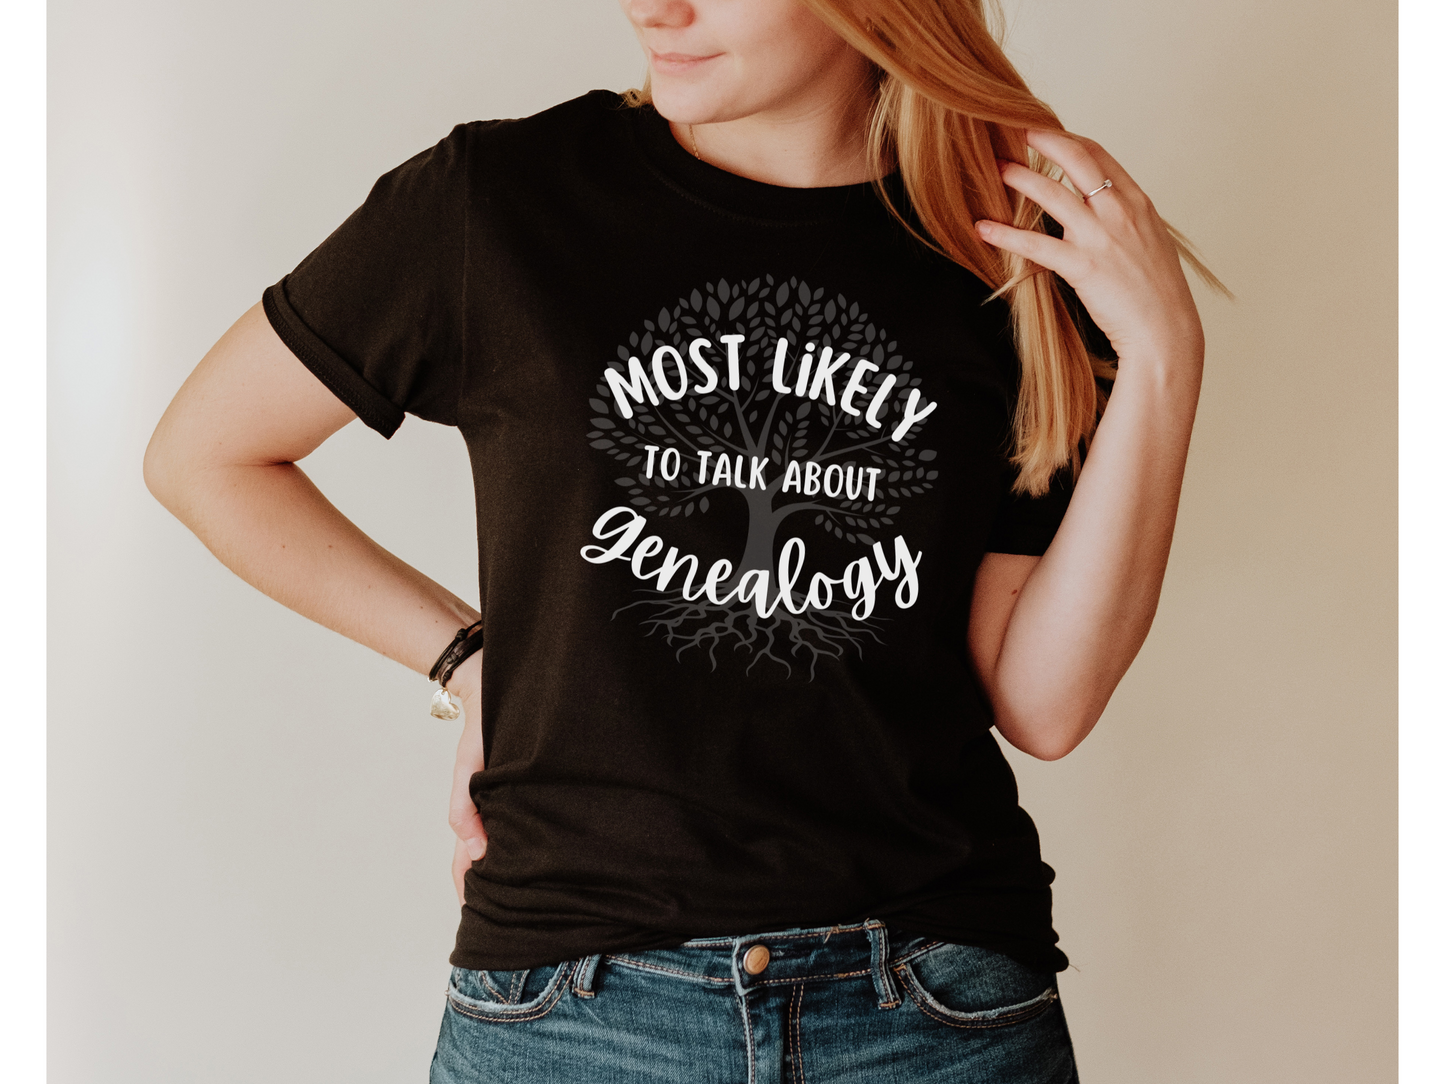 Most Likely to Talk About Genealogy T-Shirt